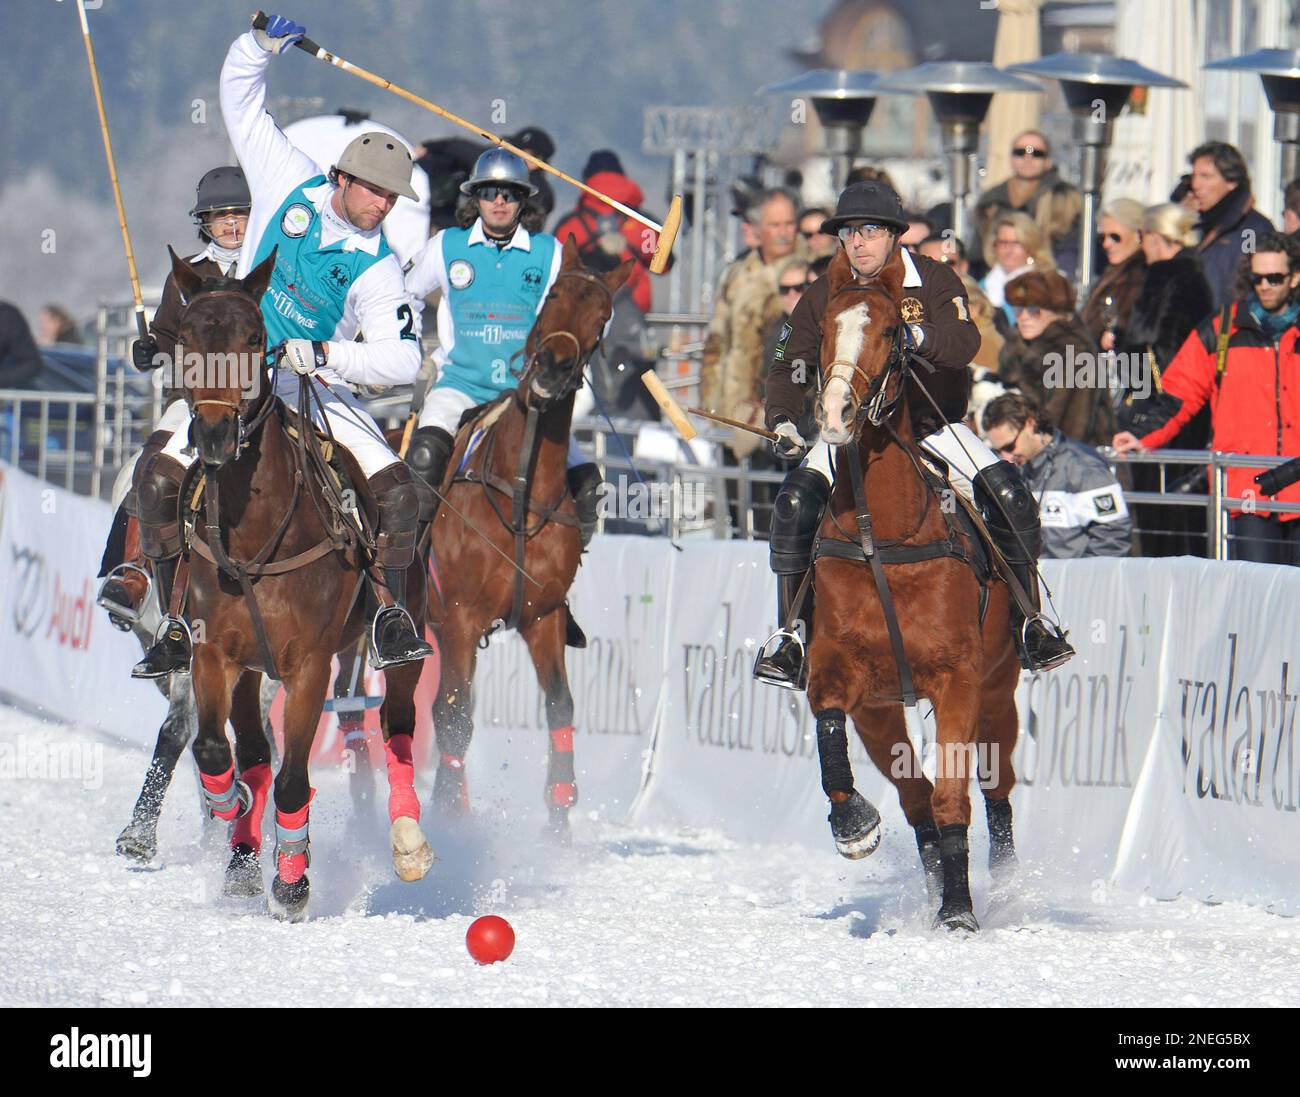 German actor Heino Ferch, right, and Sven Schneider, left, challenge for  the ball during their match in the Snow Arena Polo World Cup in Kitzbuehel,  Austria, Friday, Jan 15, 2010. (AP Photo/